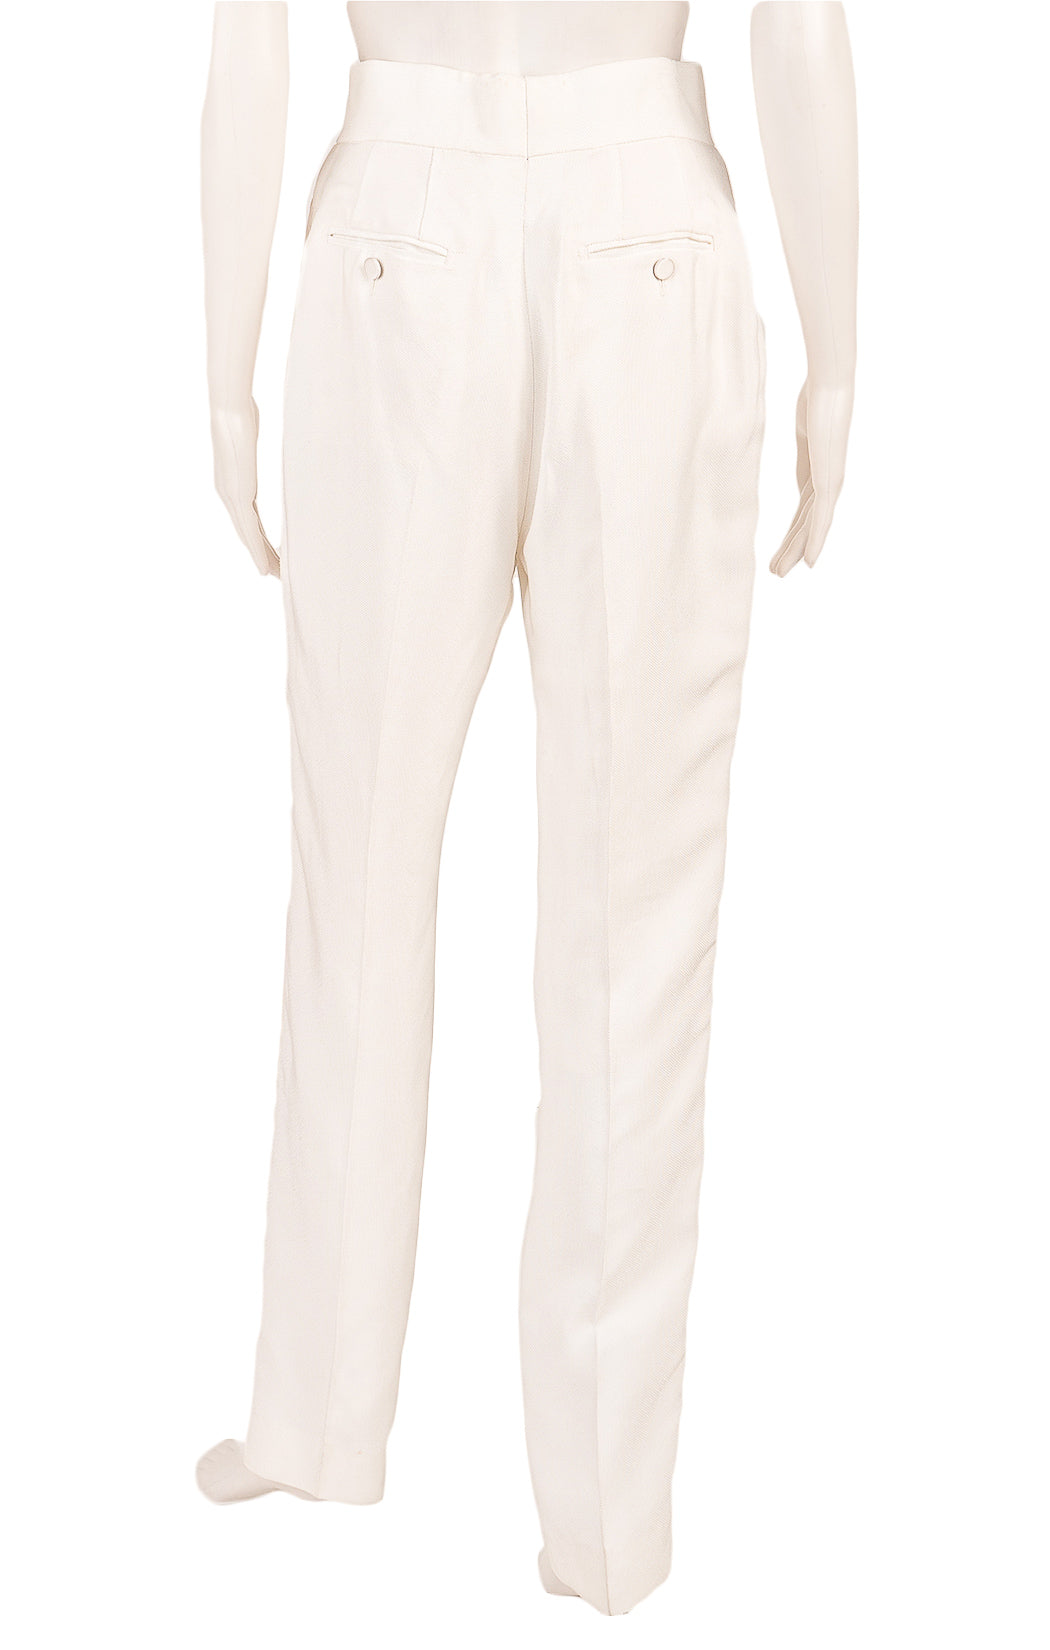 TOM FORD Pants Size: IT 40 (comparable to US 4)